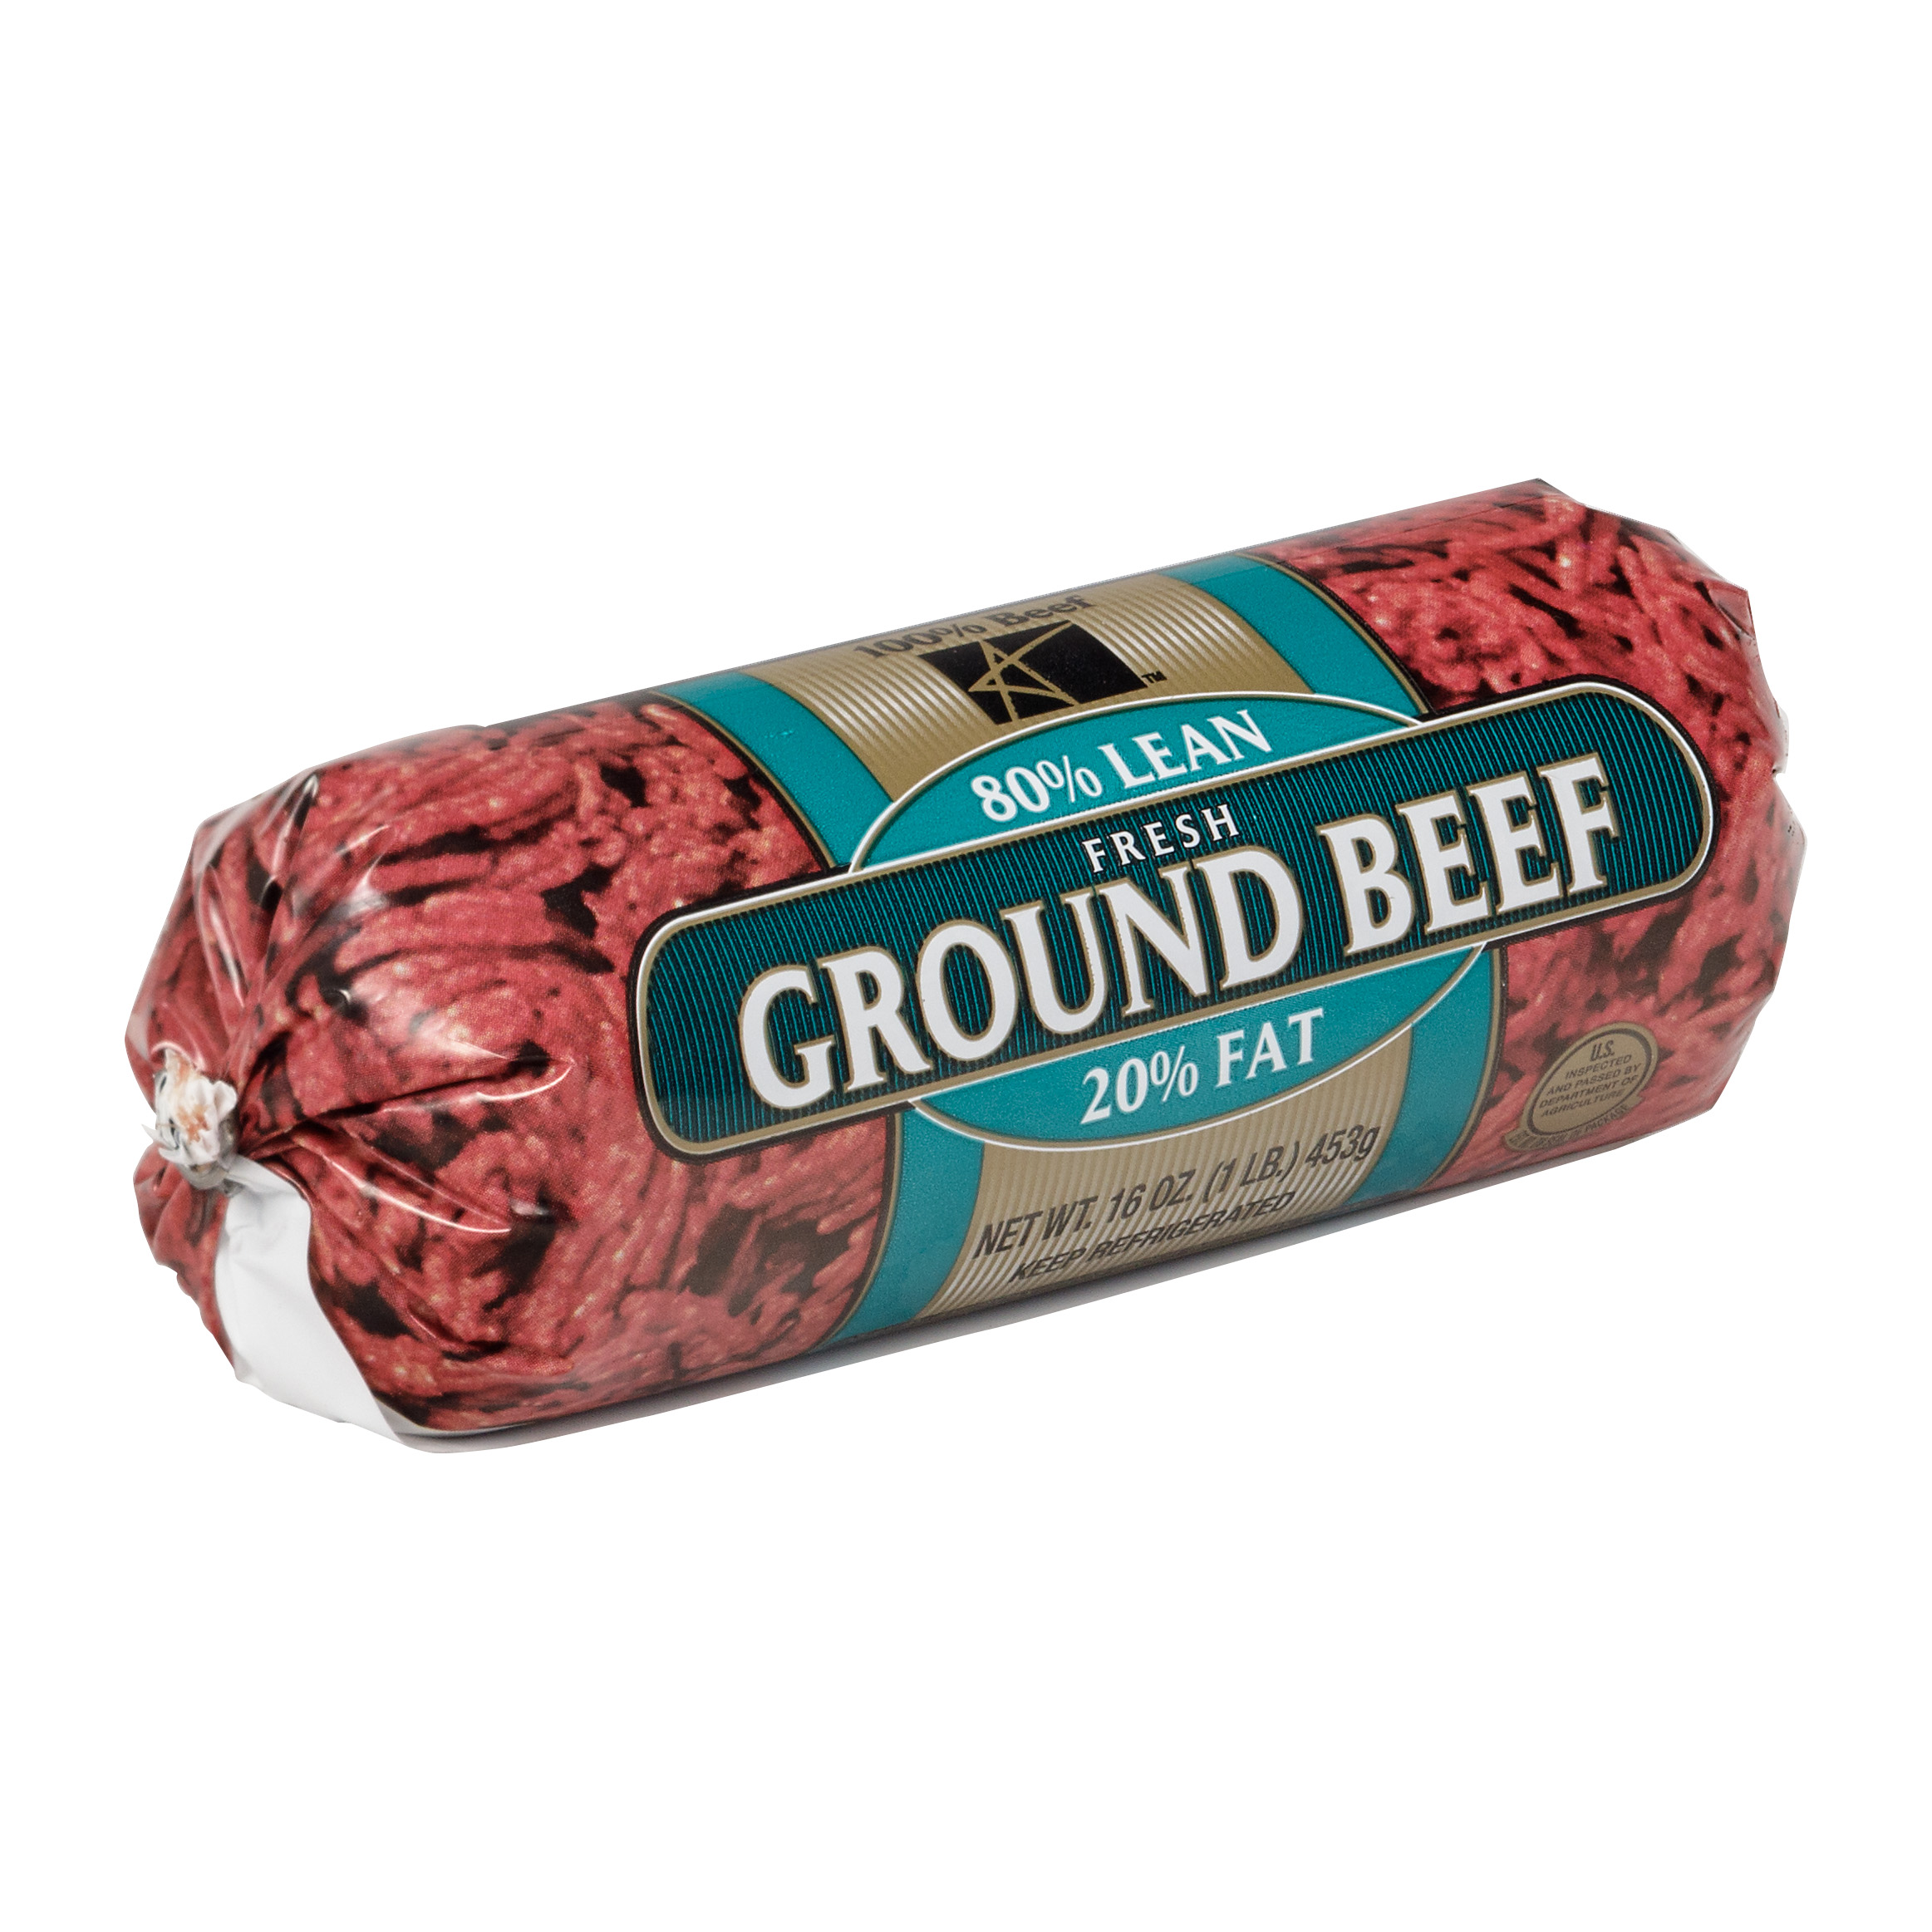 1 Lb. Ground Beef / Chub Bags - Case of 1000